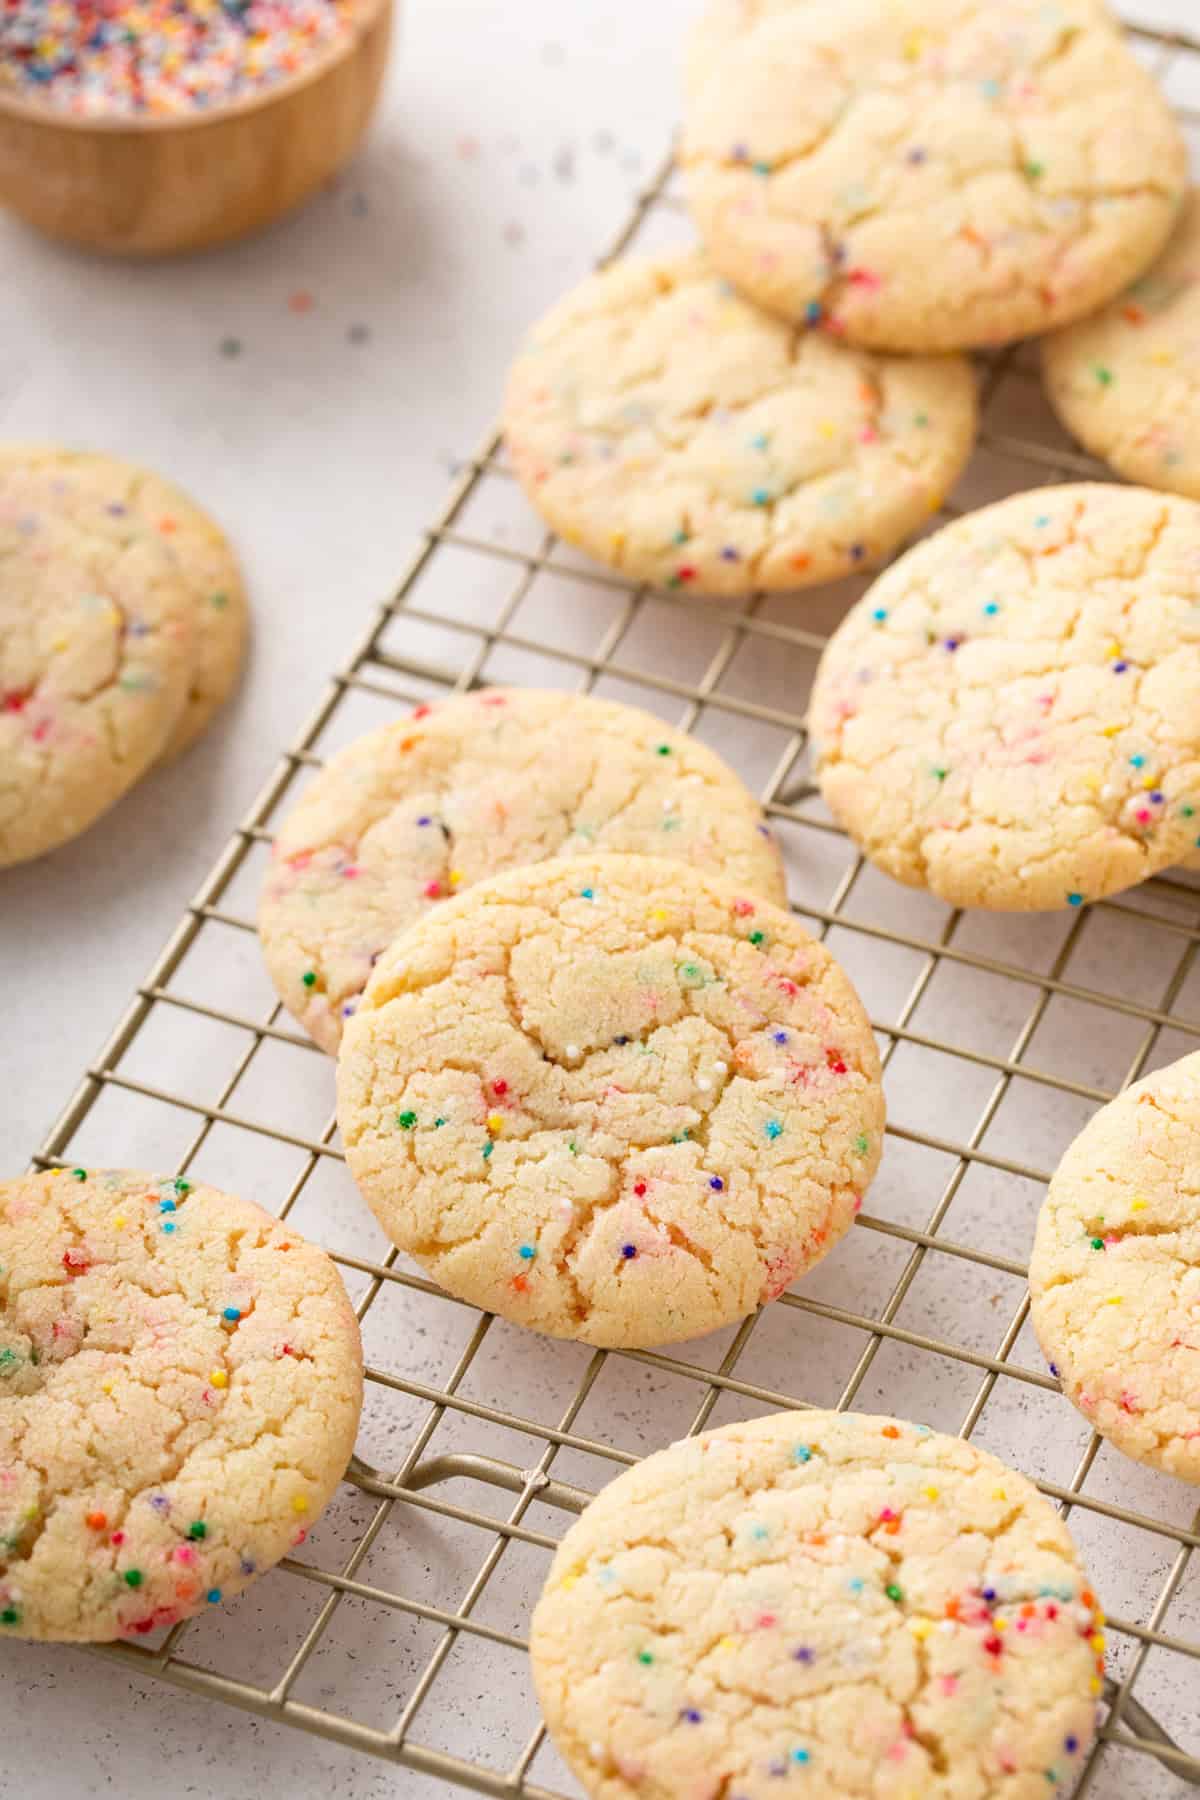 Easy sugar cookies with nonpareil sprinkles arranged on a wire rack.